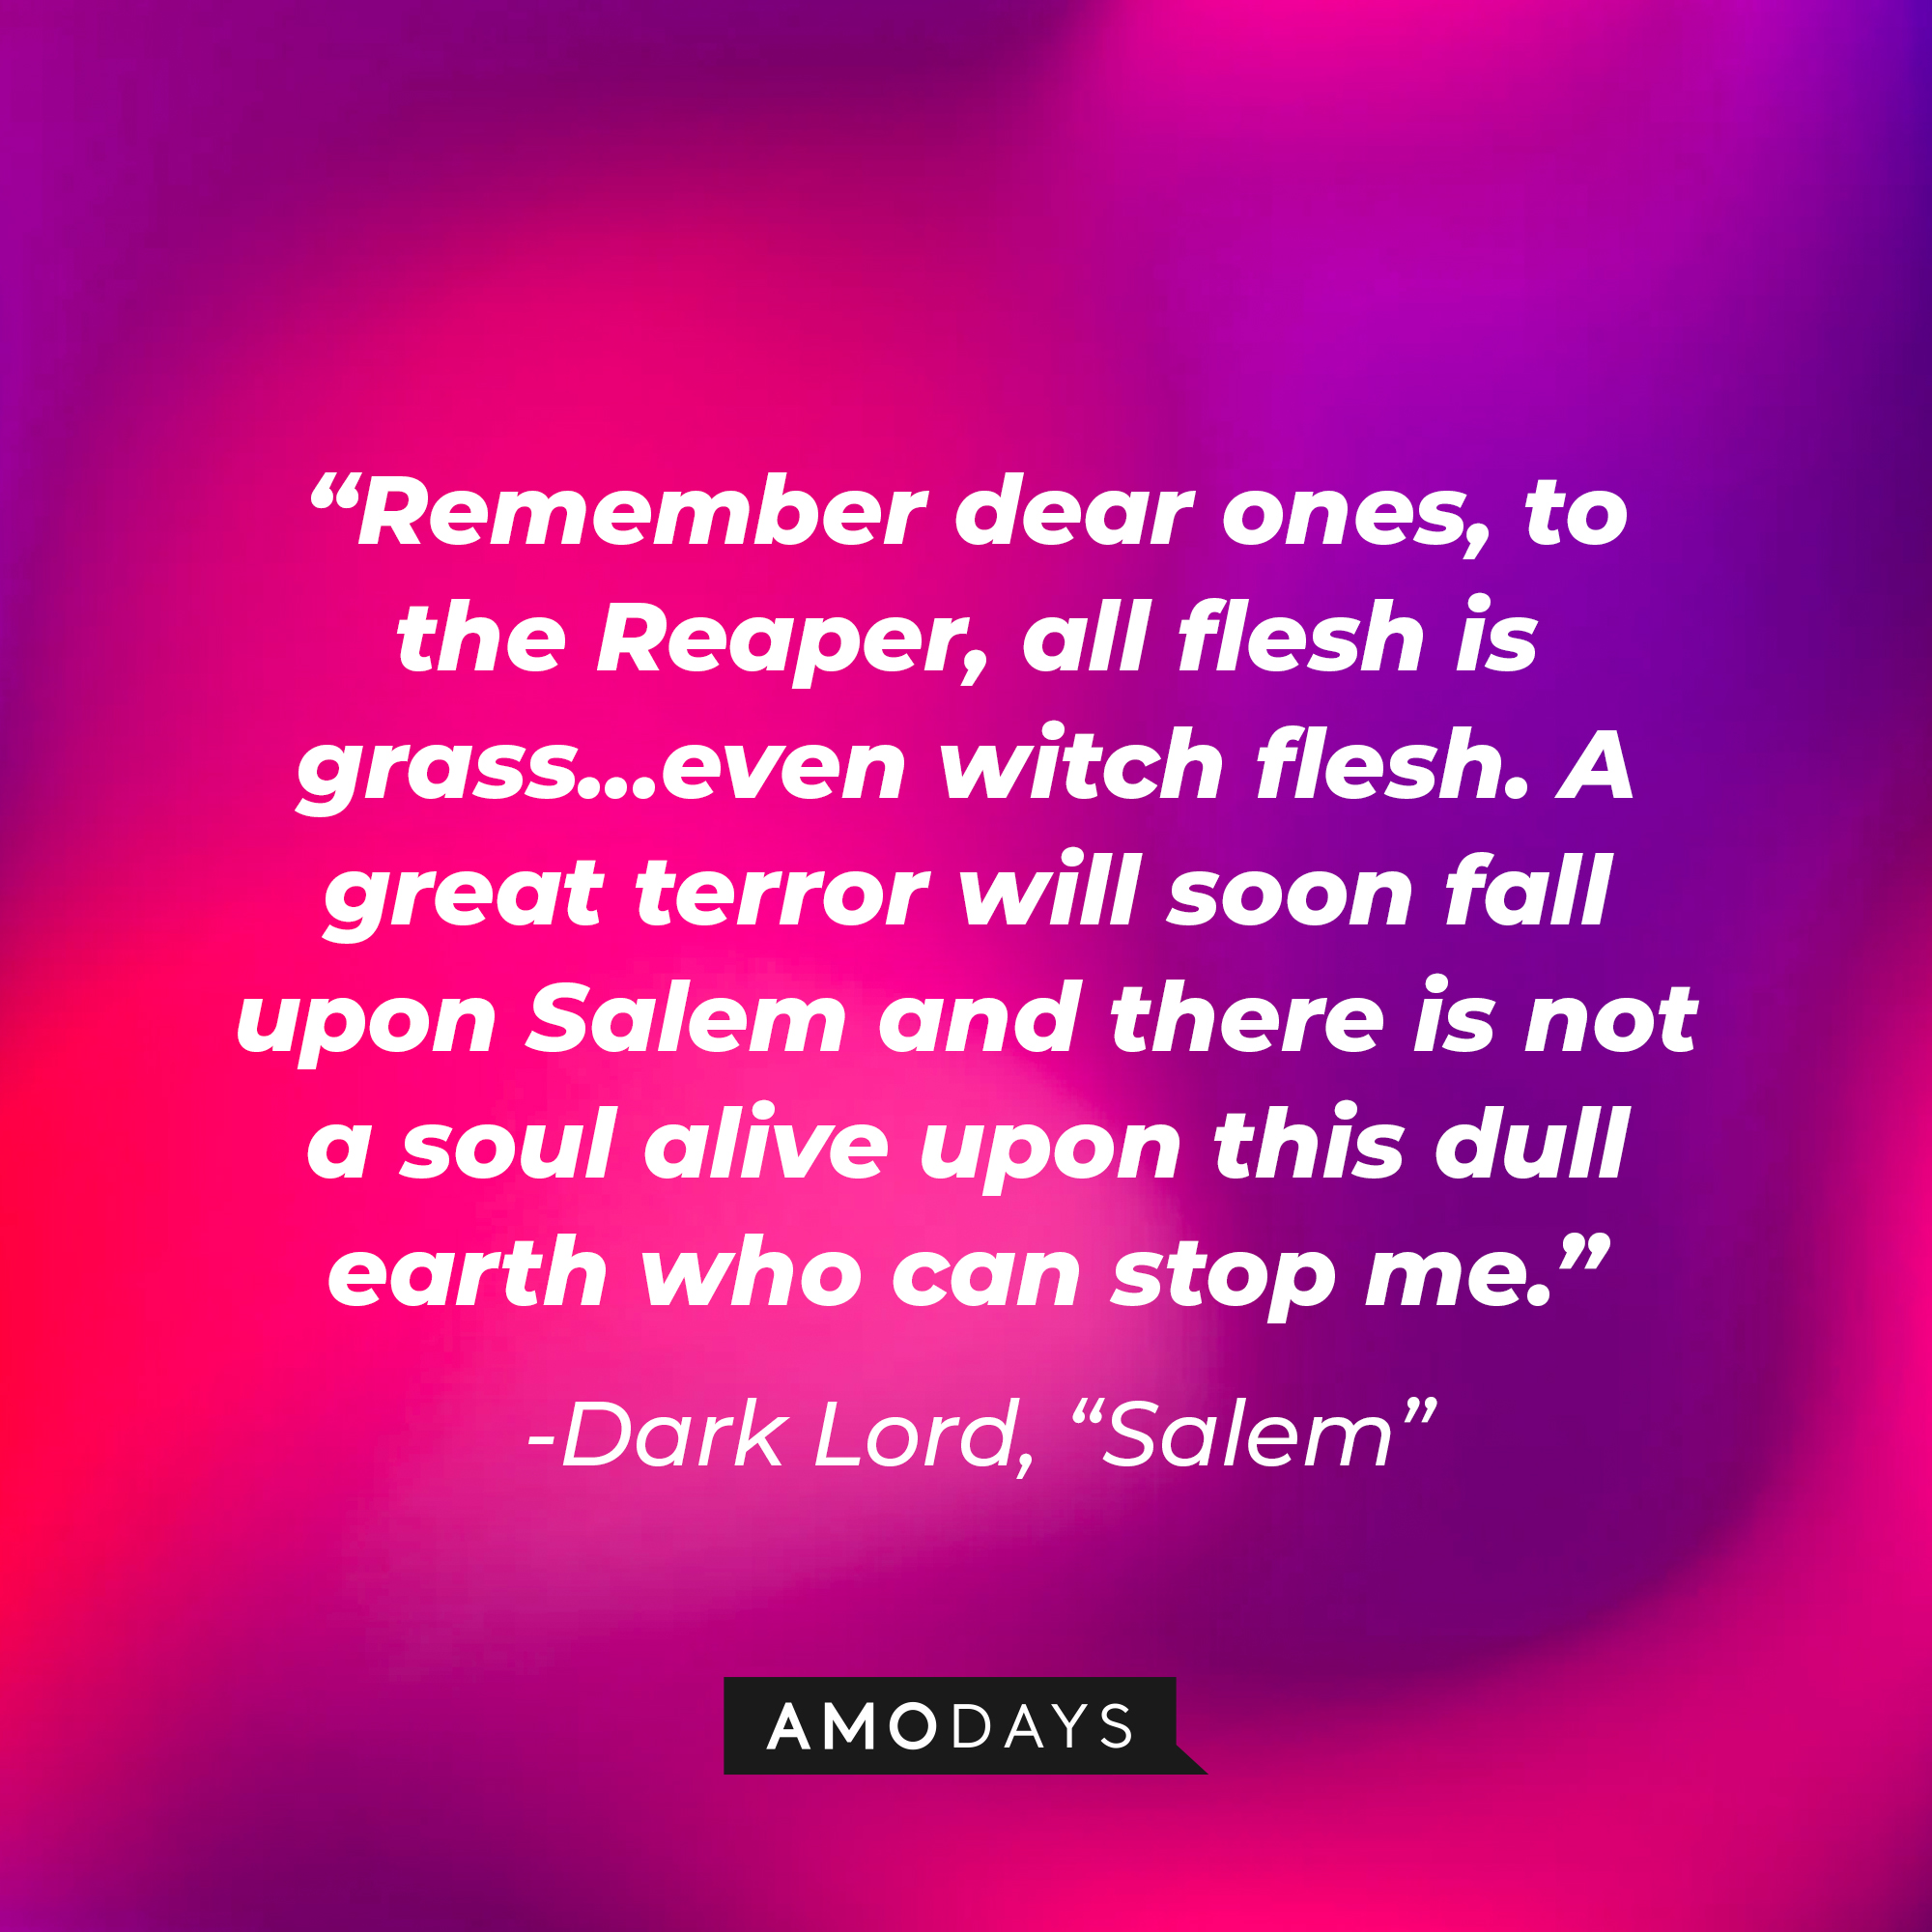 Dark Lord's quote: "Remember dear ones, to the Reaper, all flesh is grass...even witch flesh. A great terror will soon fall upon Salem and there is not a soul alive upon this dull earth who can stop me." | Source: Amodays